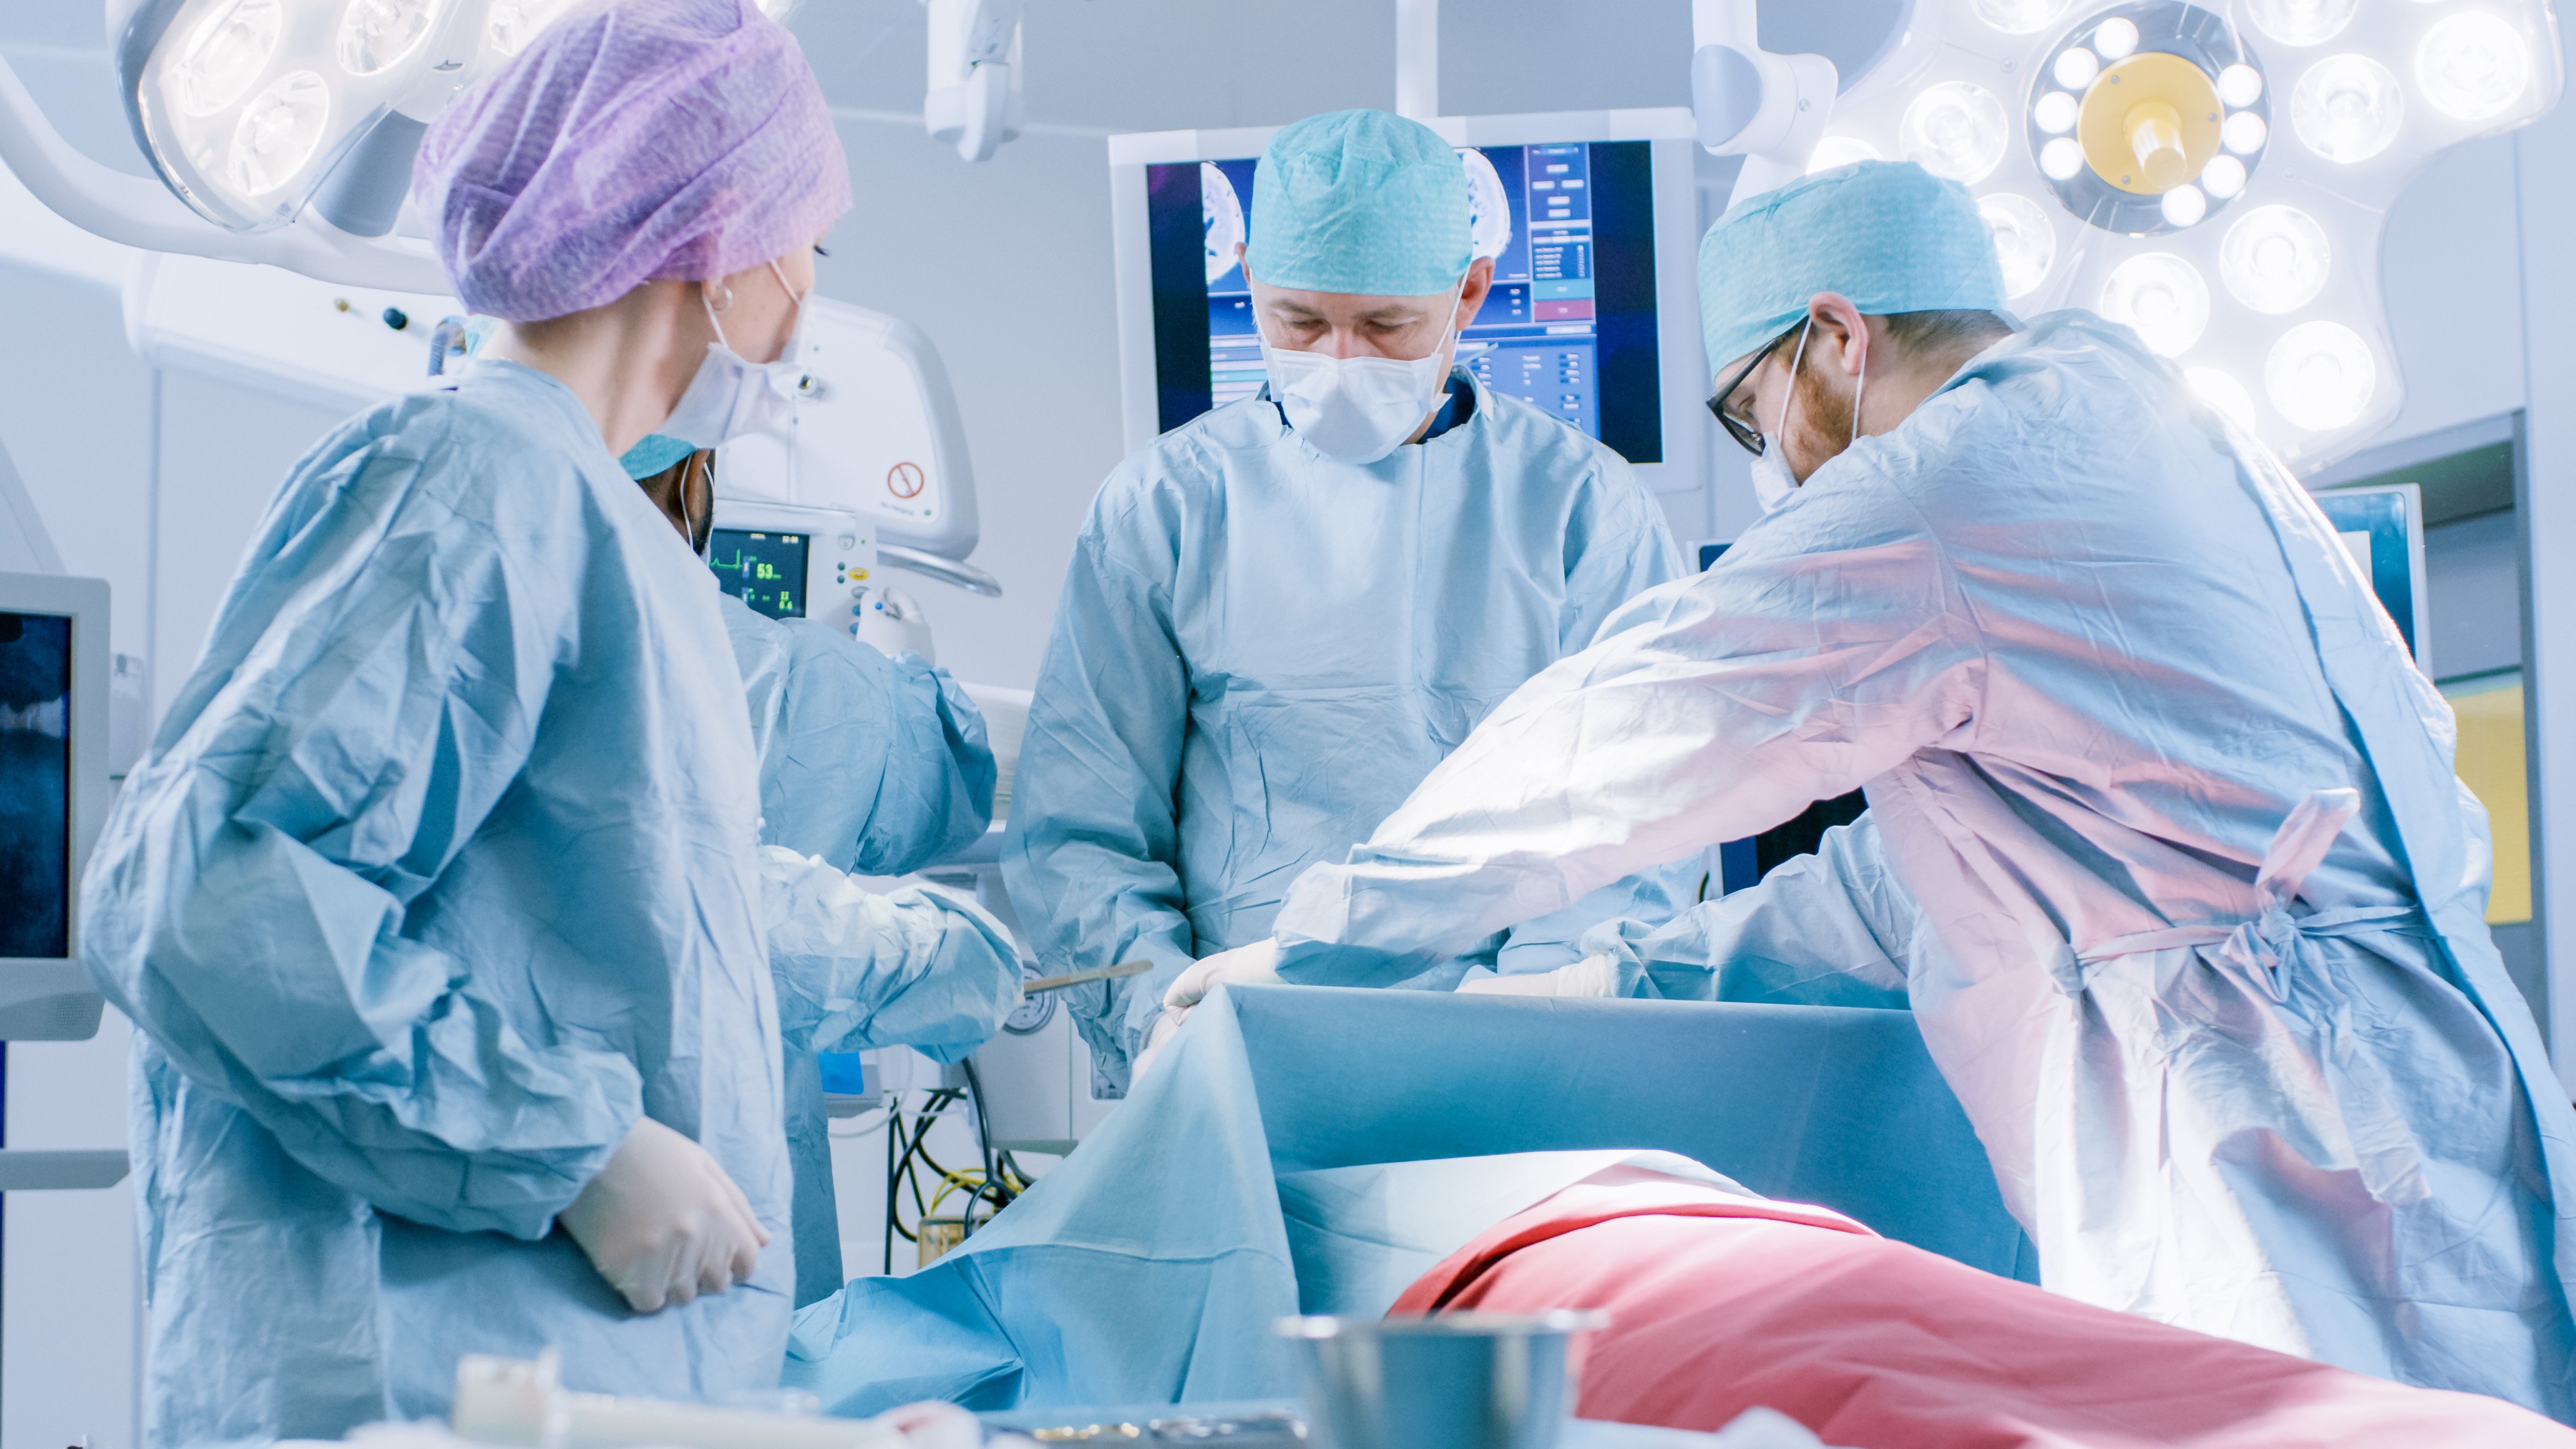 Hong Kong’s need for more medical education is urgent, but planners must come up with the correct remedy to ensure the sector’s long-term health. Photo: Shutterstock